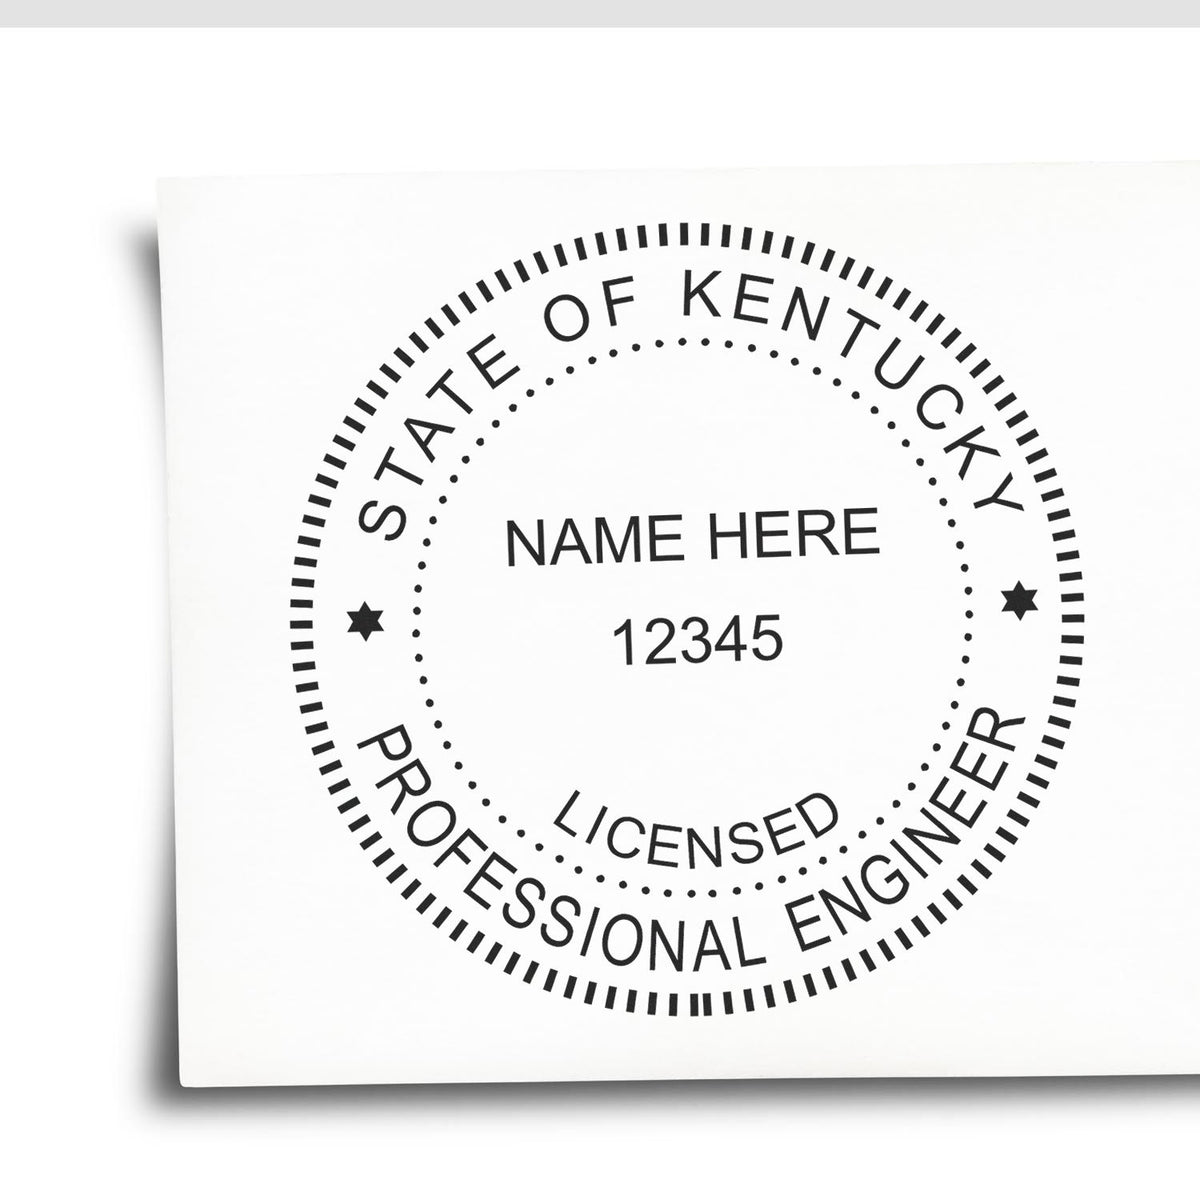 A lifestyle photo showing a stamped image of the Digital Kentucky PE Stamp and Electronic Seal for Kentucky Engineer on a piece of paper